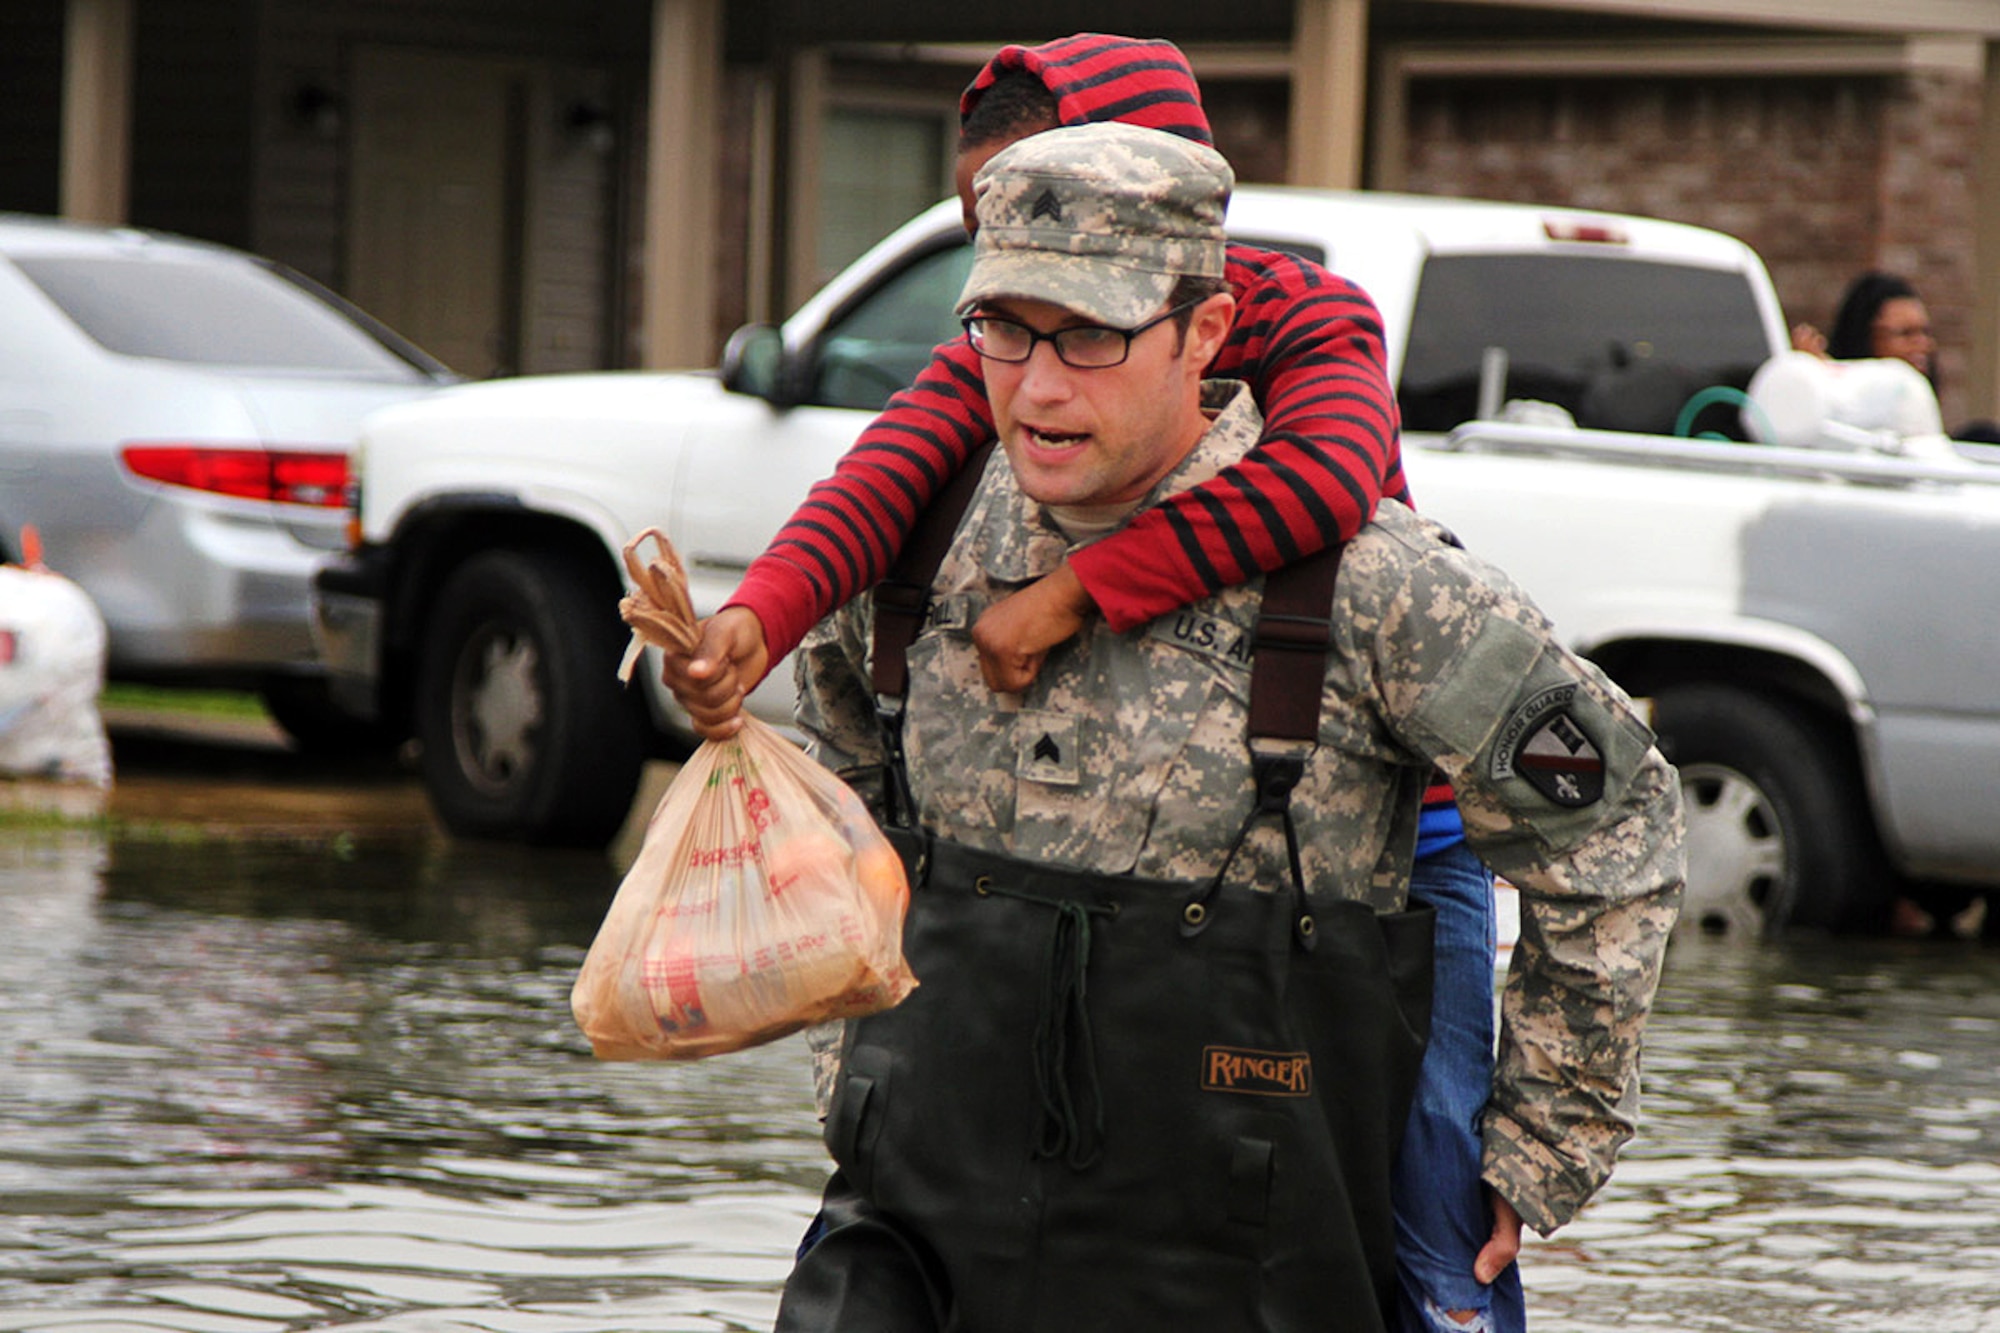 Sgt. Jason C. Carroll, an electronic warfare specialist with the Louisiana National Guard's 528th Engineer Battalion, 225th Engineer Brigade, carries a young resident through flooded streets in Monroe, La., March 10, 2016. The 528th EN BN used light medium tactical vehicles in cooperation with the Ouachita Parish Sheriff's Office to navigate through high waters in order to assist the residents who wished to leave. (U.S. Army National Guard photo/Spc. Tarell J. Bilbo)